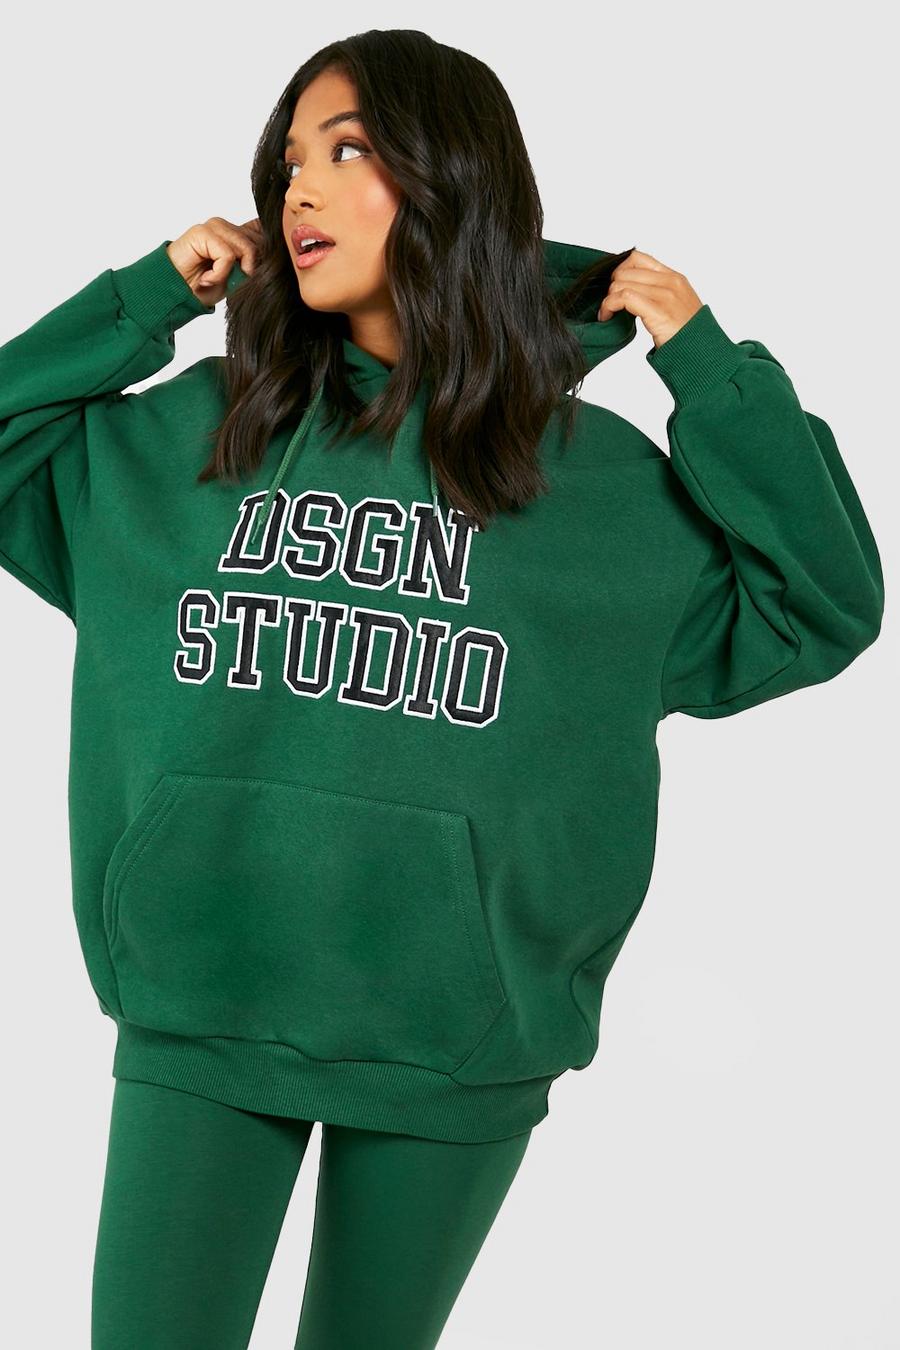 Forest green Petite Dsgn Studio Printed Hoody And Leggings Tracksuit